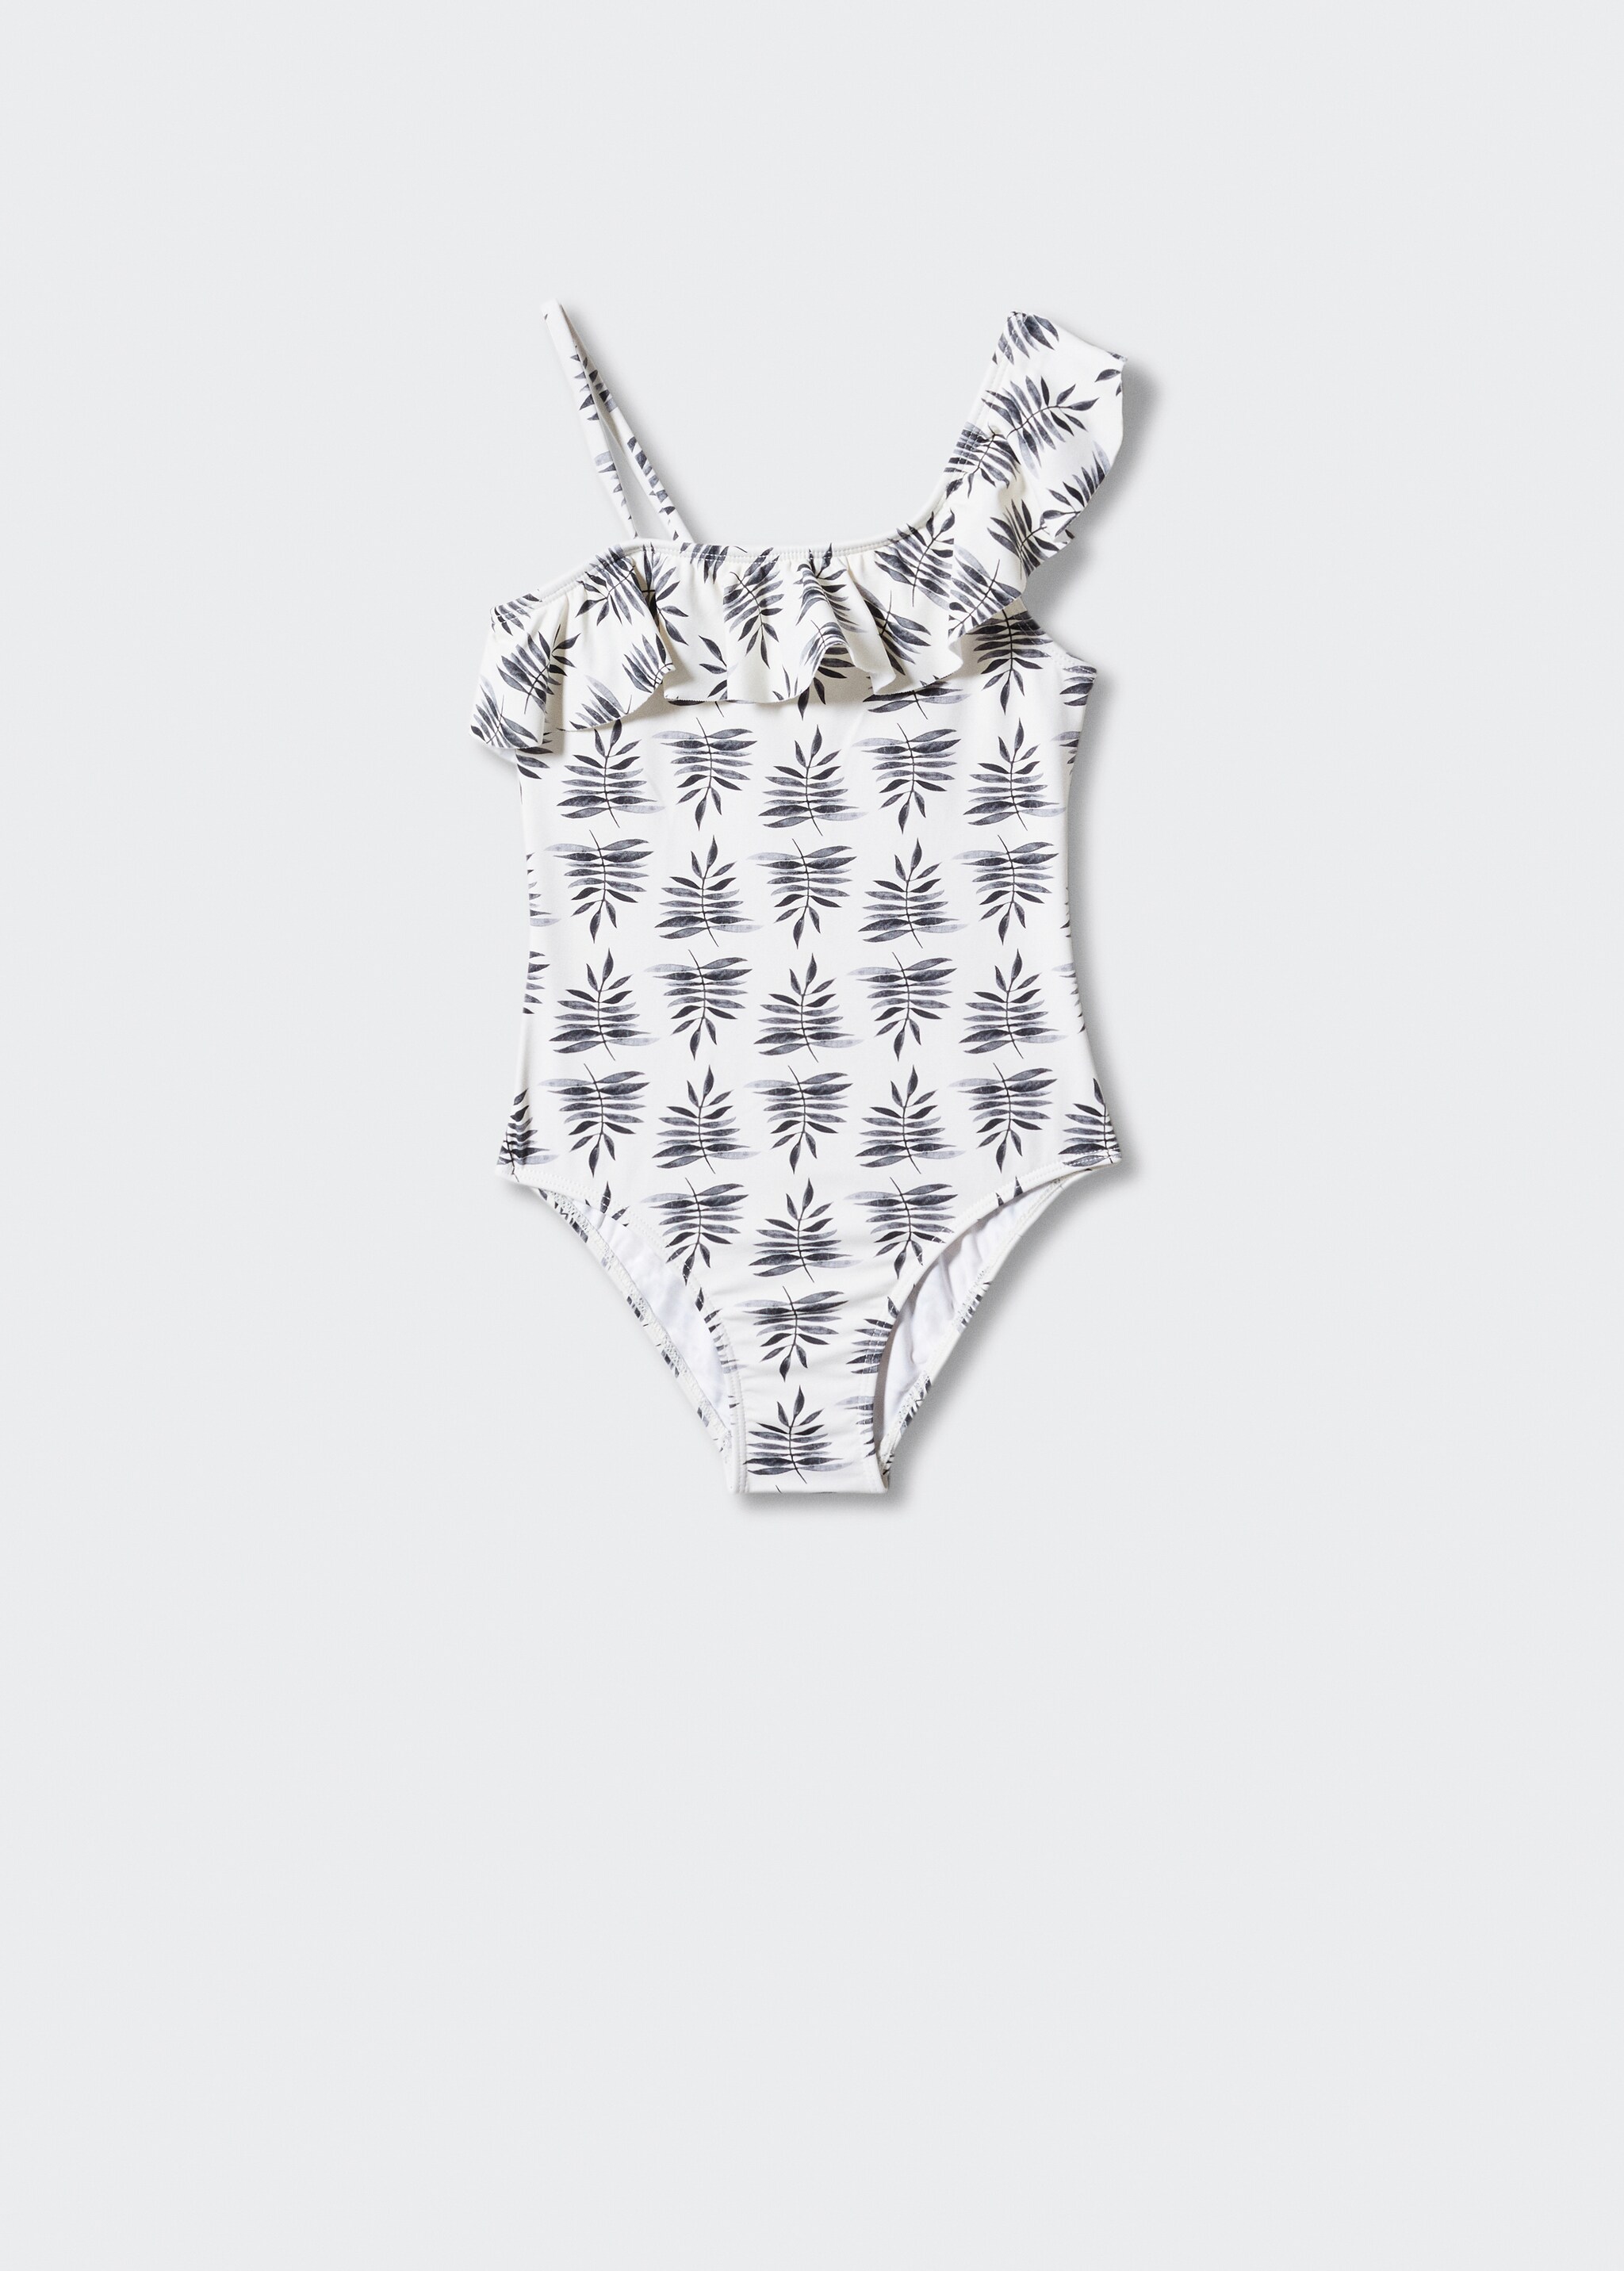 Asymmetrical-print swimsuit - Article without model